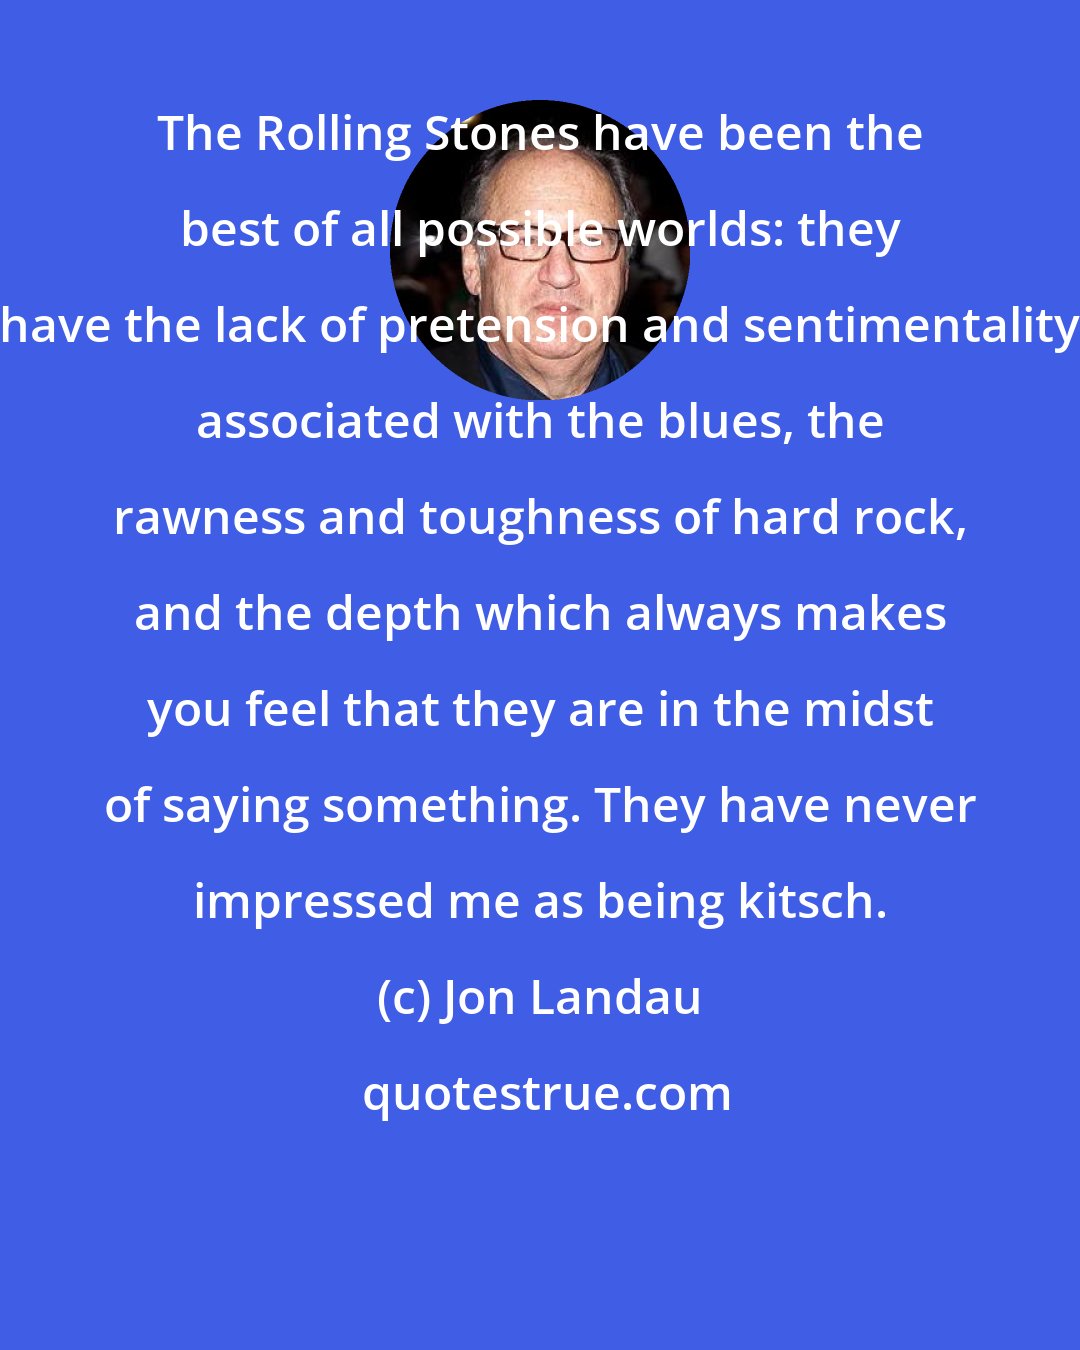 Jon Landau: The Rolling Stones have been the best of all possible worlds: they have the lack of pretension and sentimentality associated with the blues, the rawness and toughness of hard rock, and the depth which always makes you feel that they are in the midst of saying something. They have never impressed me as being kitsch.